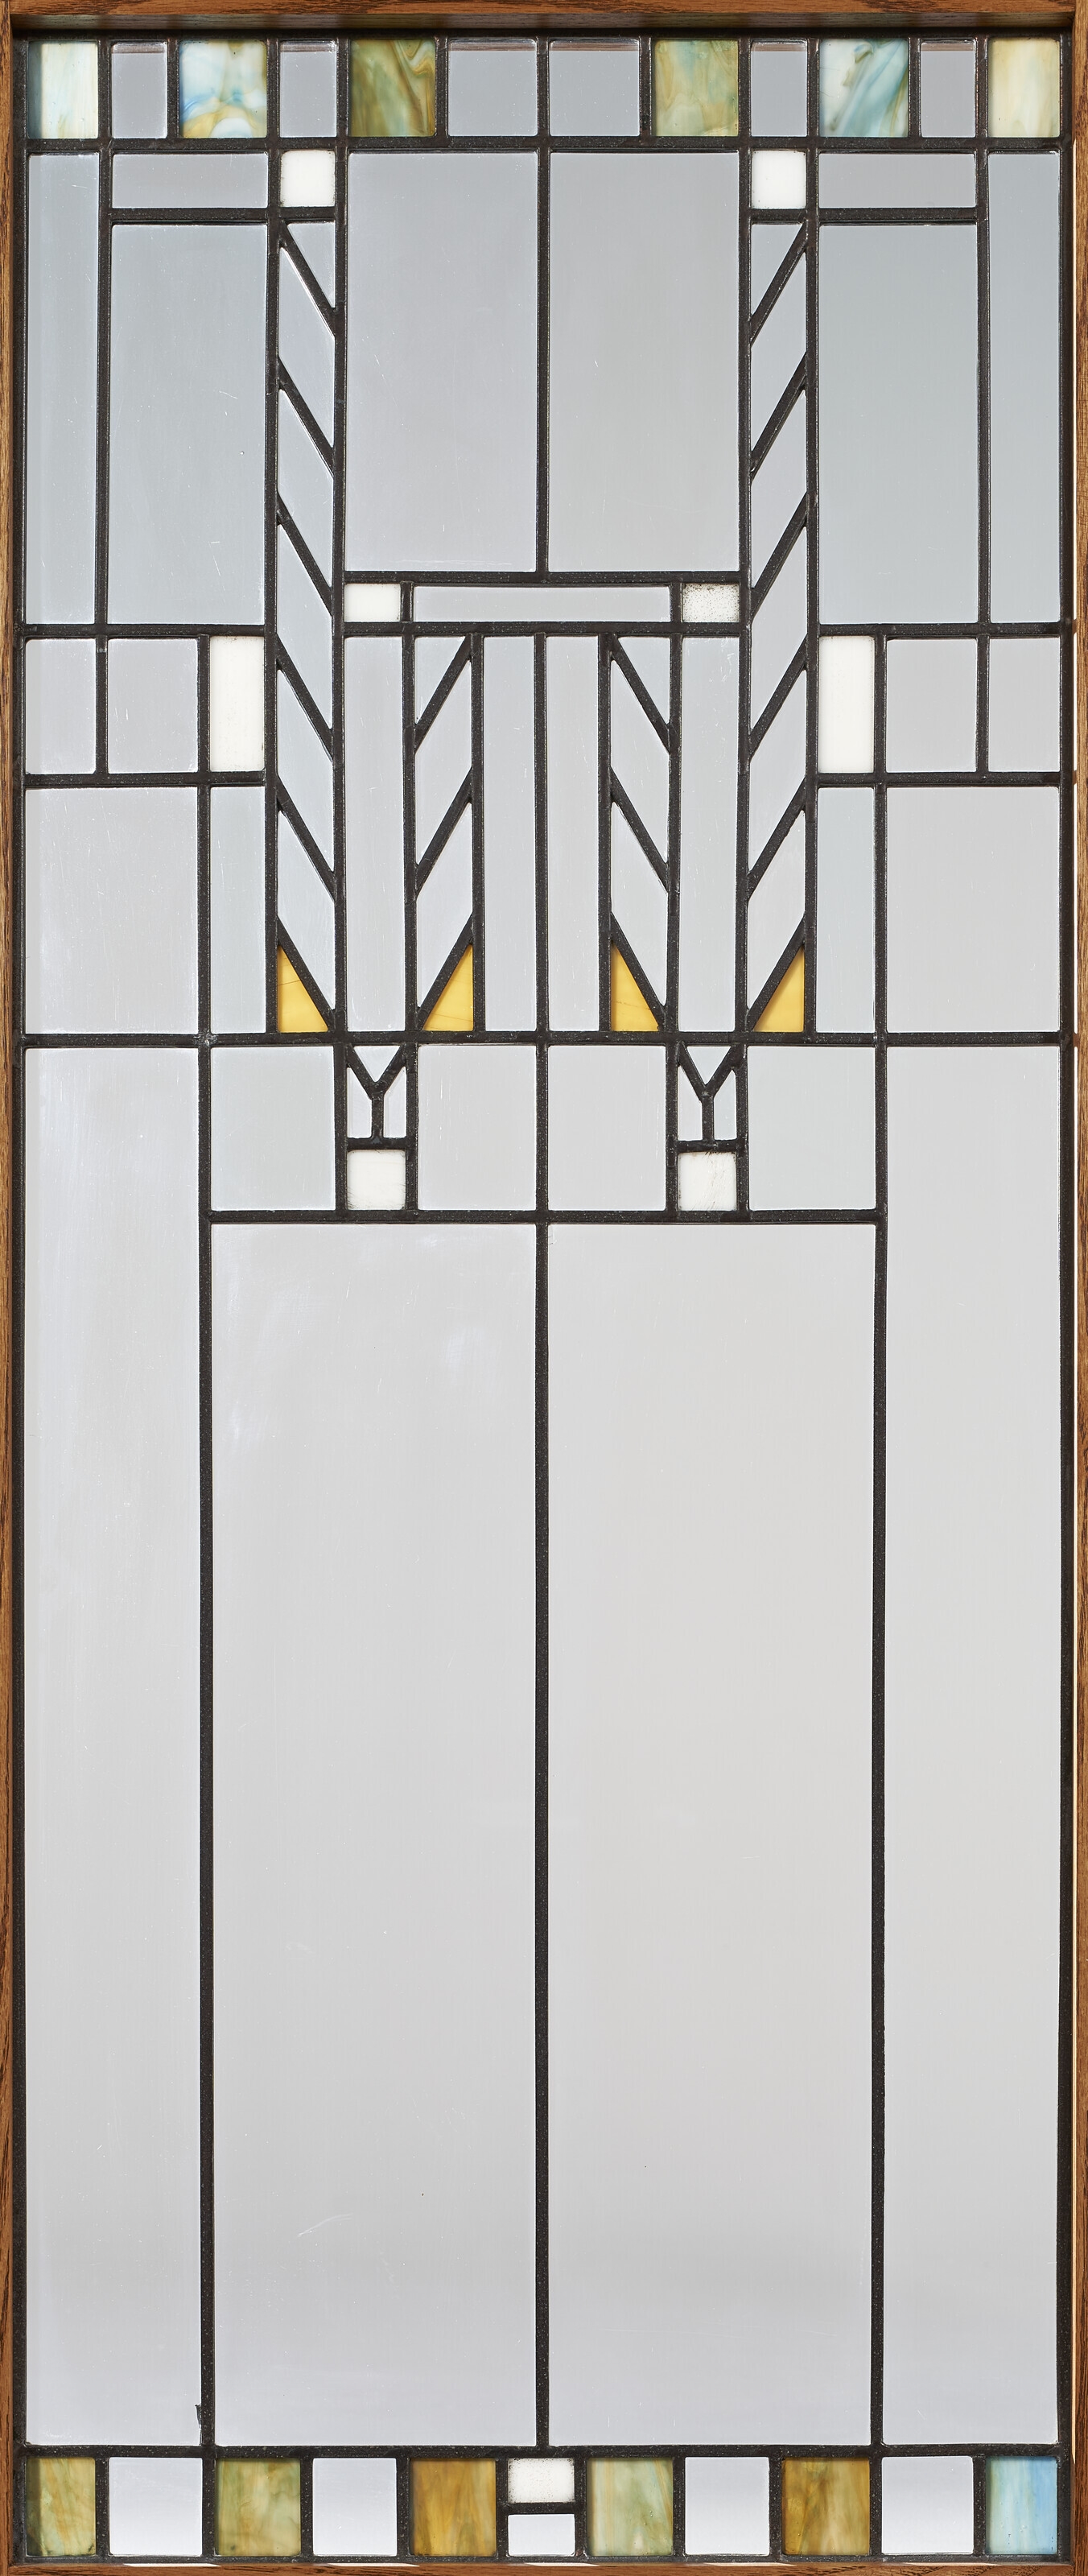 WINDOW FROM THE MEYER MAY HOUSE, GRAND RAPIDS, MICHIGAN by Frank Lloyd Wright, designed circa 1908